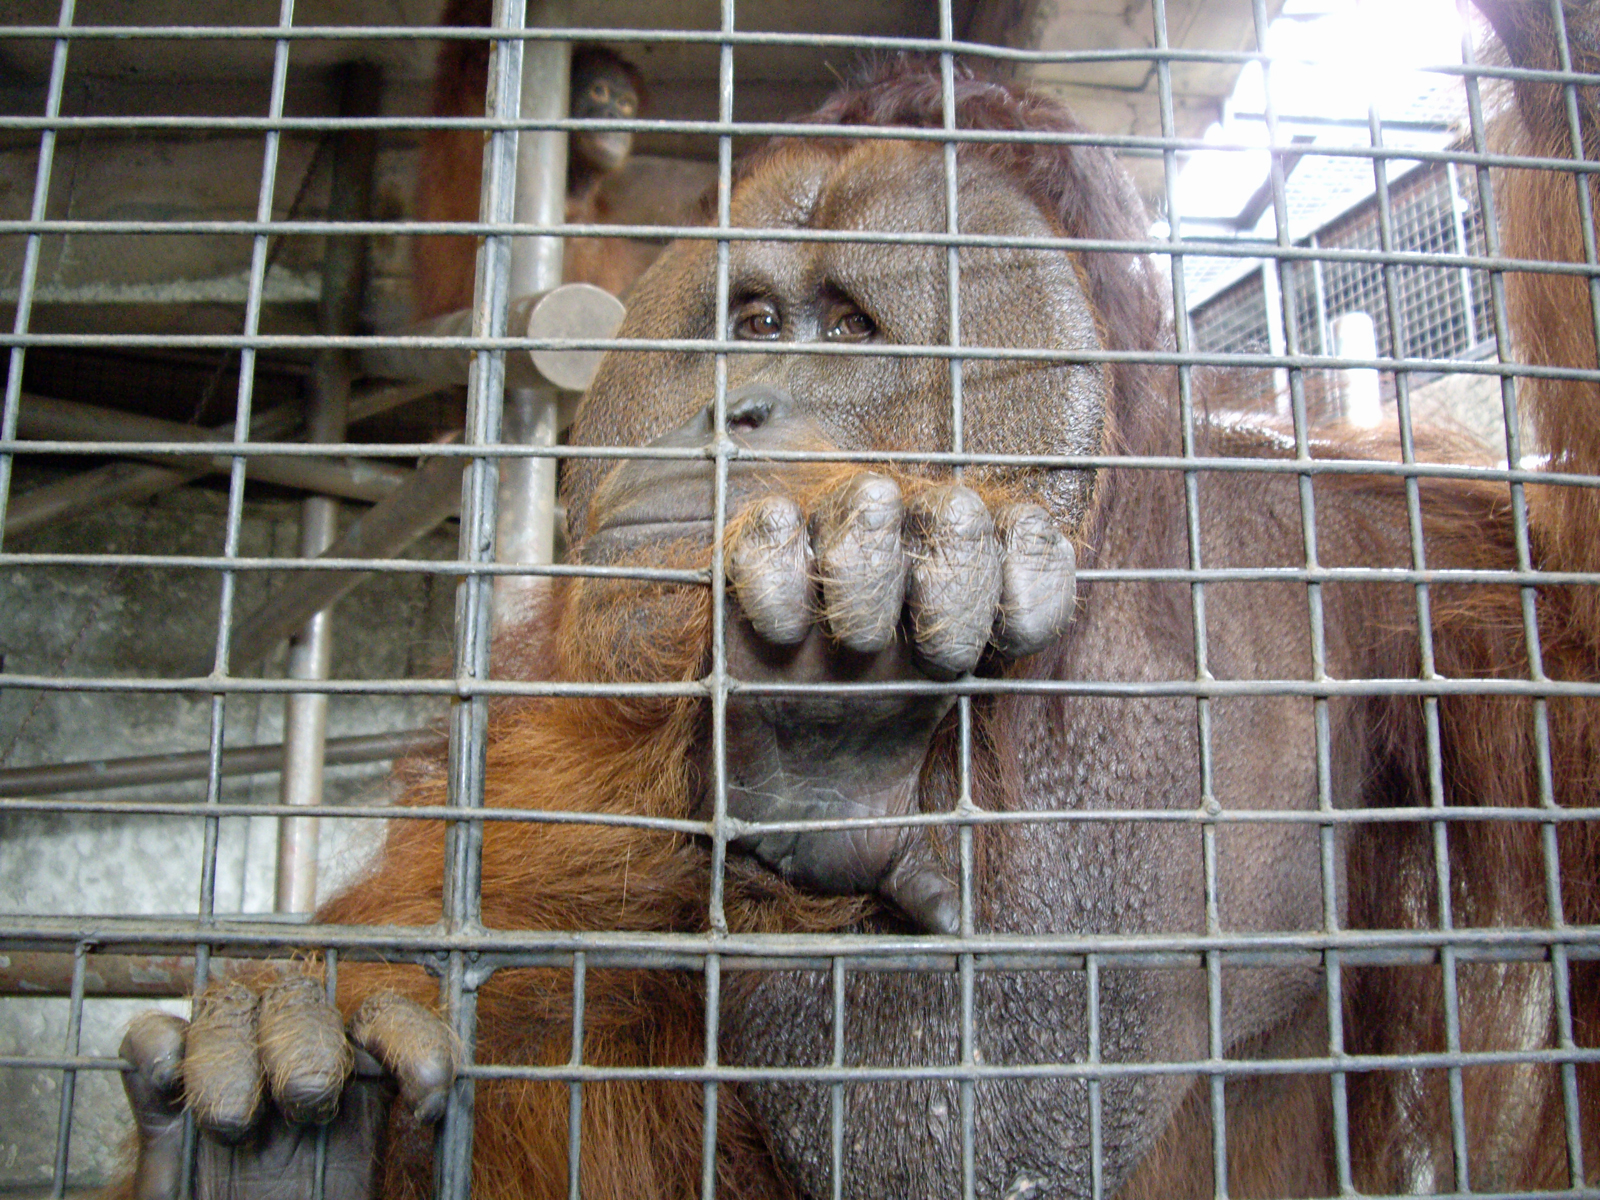 why should animals be kept in zoos